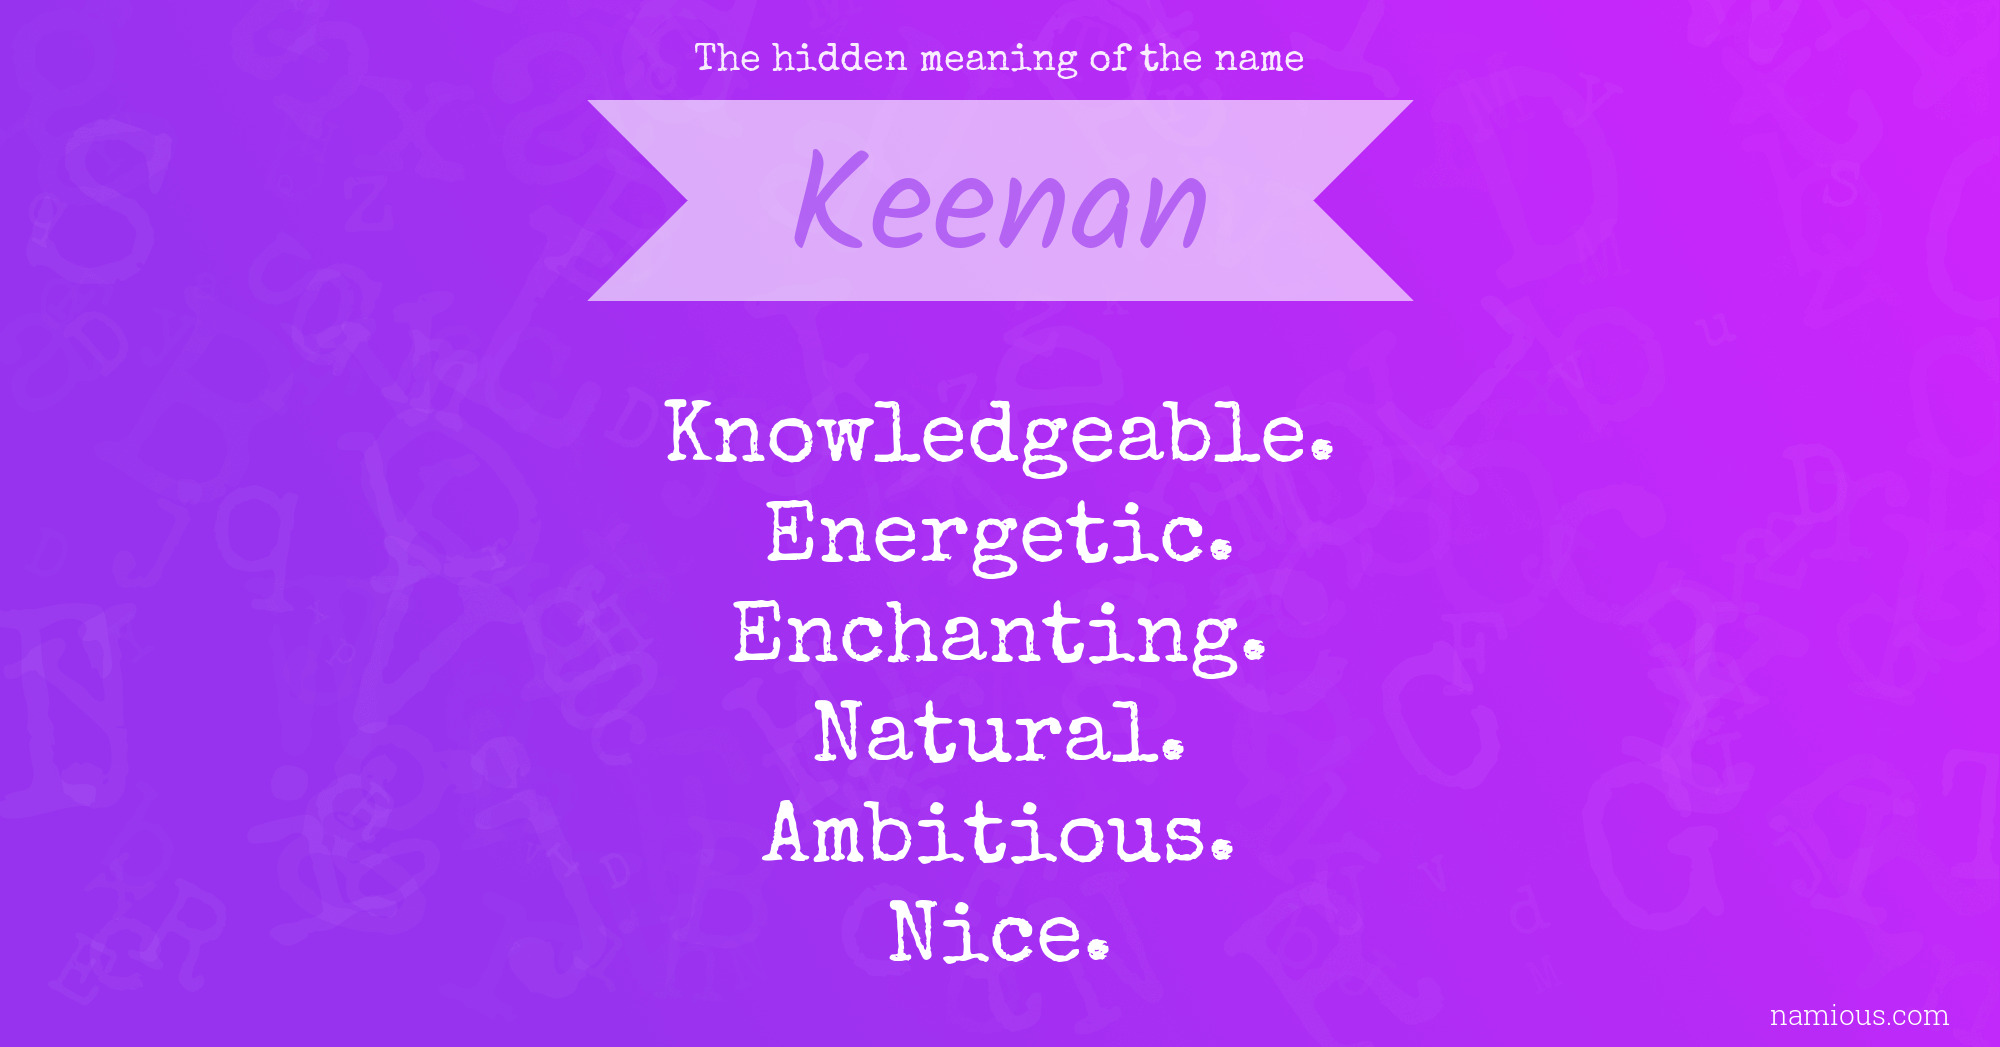 The hidden meaning of the name Keenan